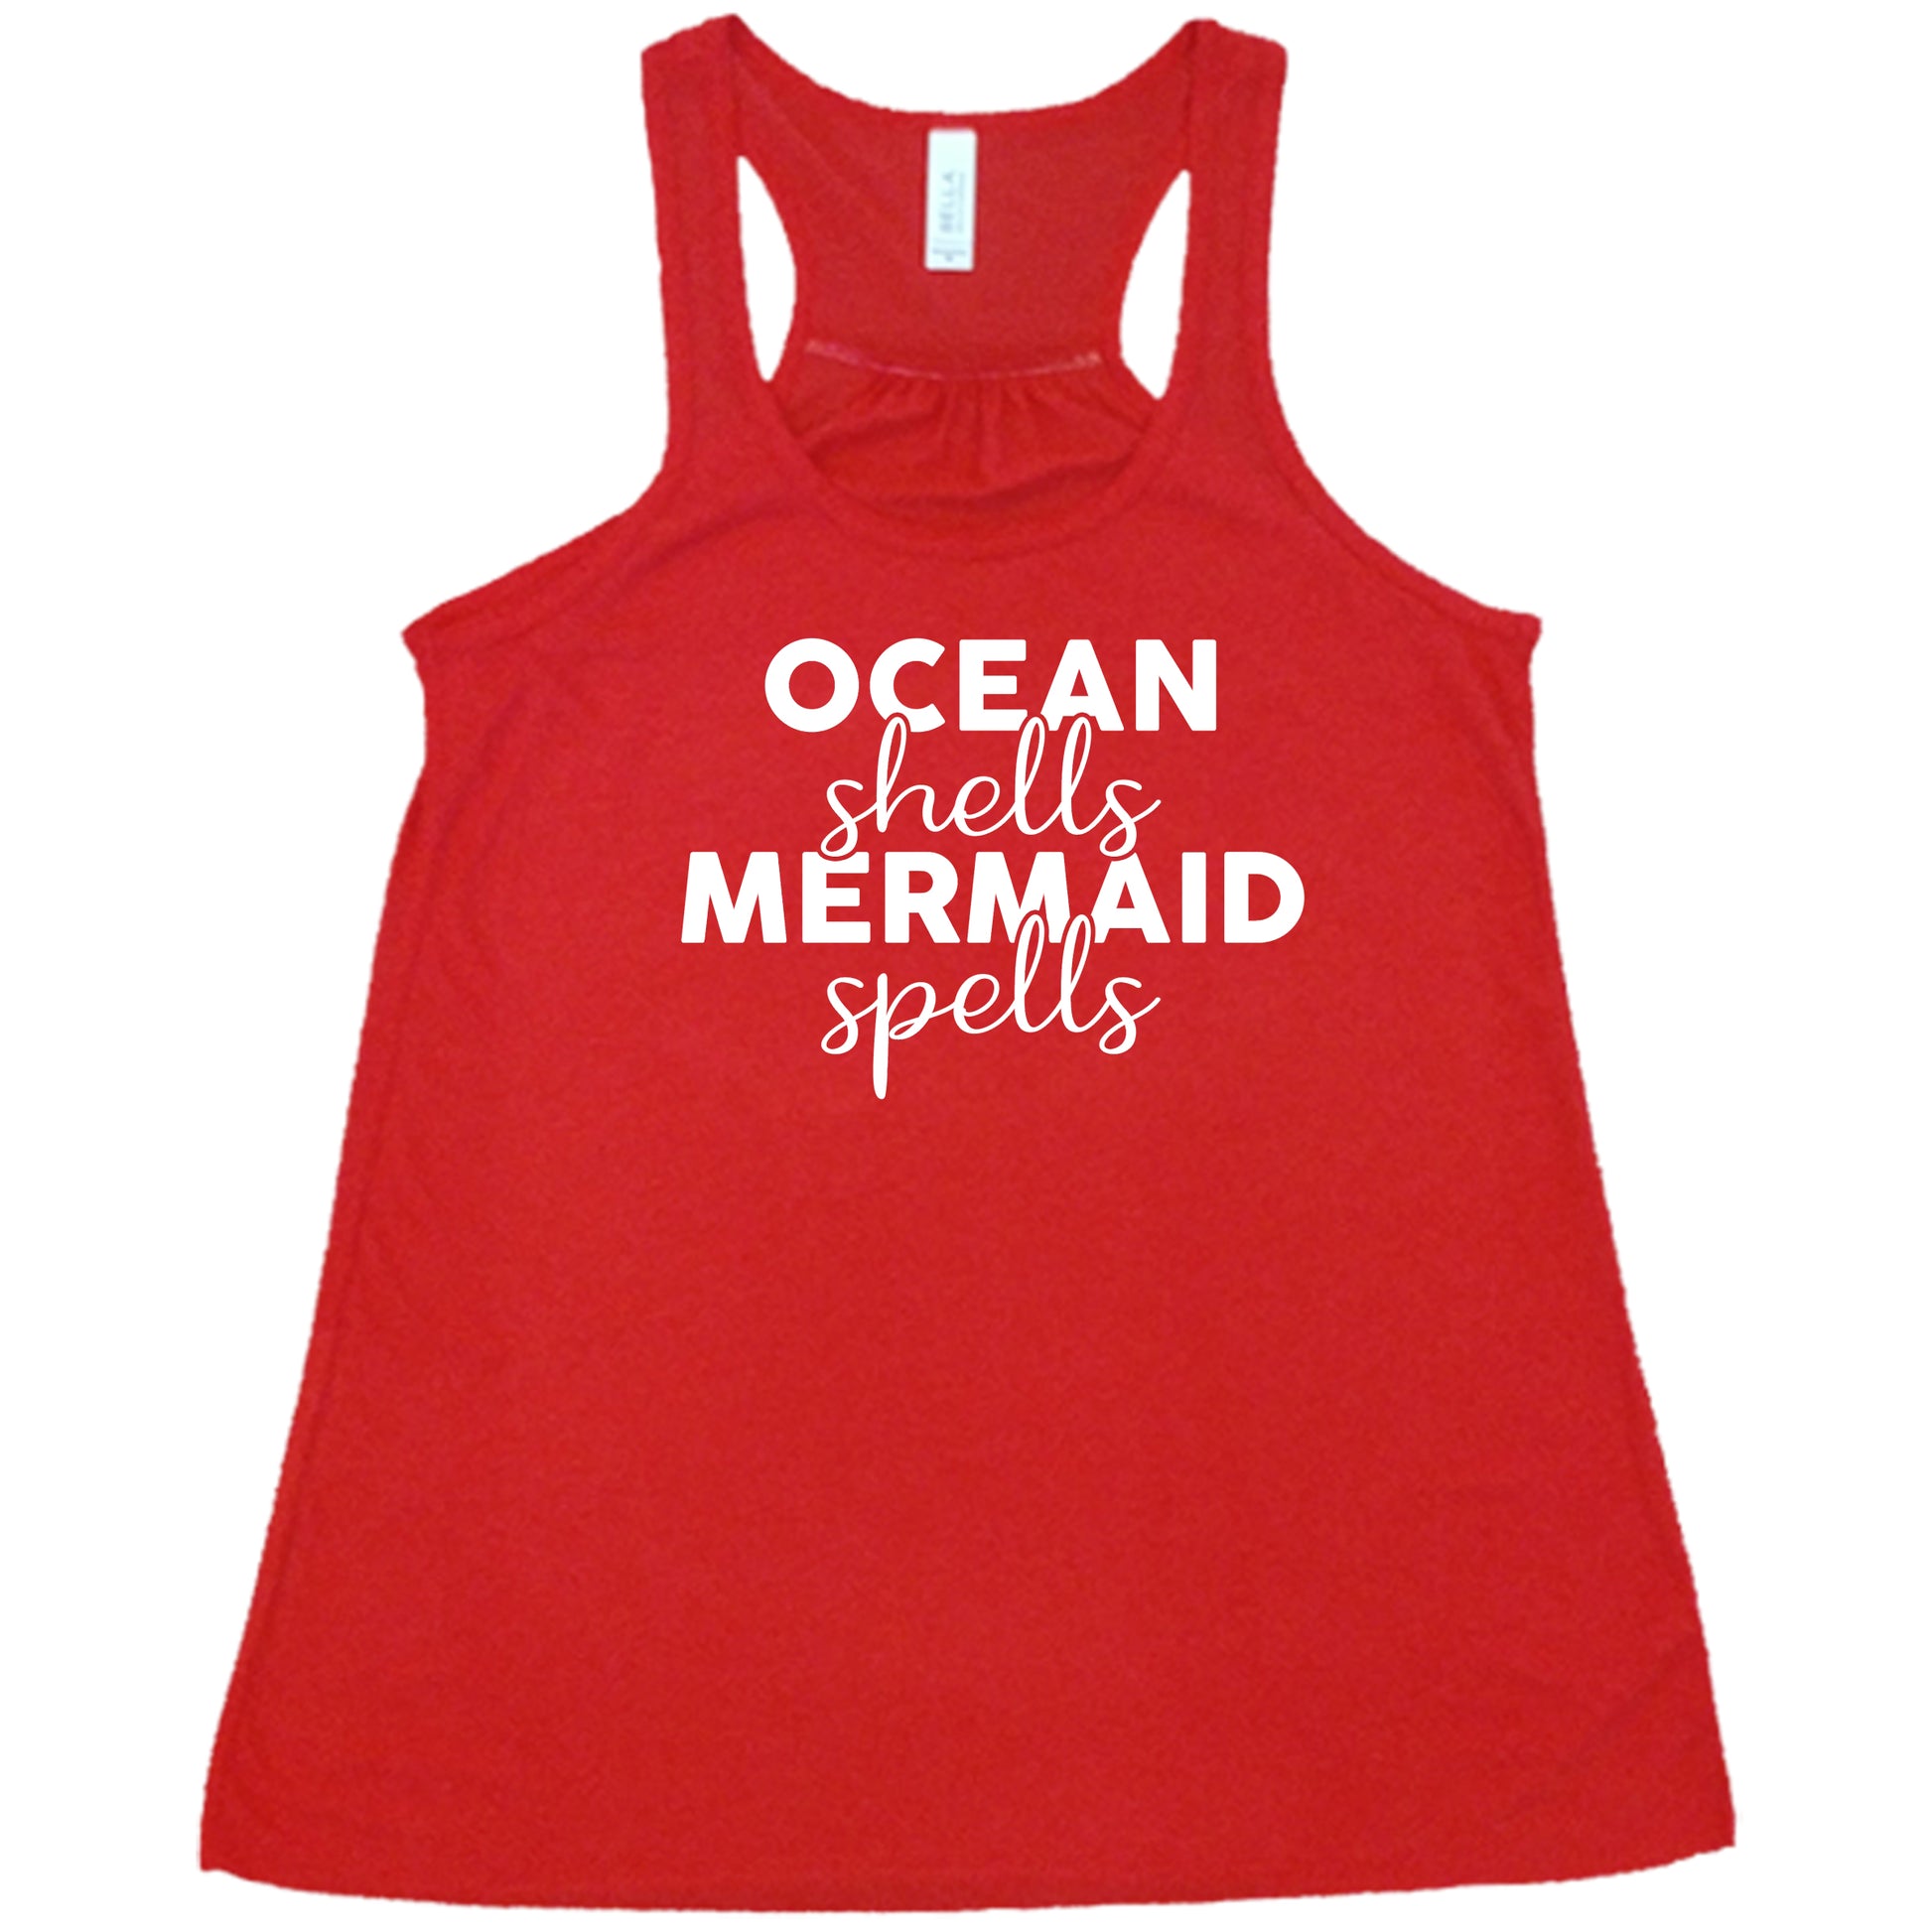 red racerback tank with the saying "ocean shells mermaid spells" in white in the center